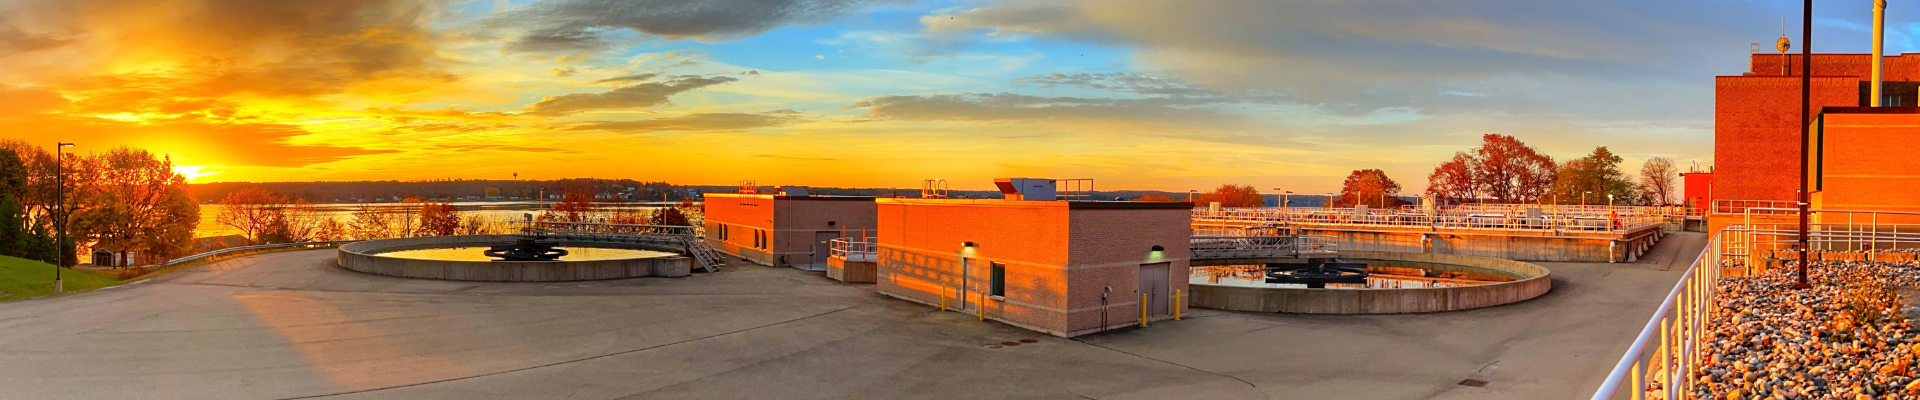 Brockville Wastewater facility beside the river at sunrise and lit up with orange morning light